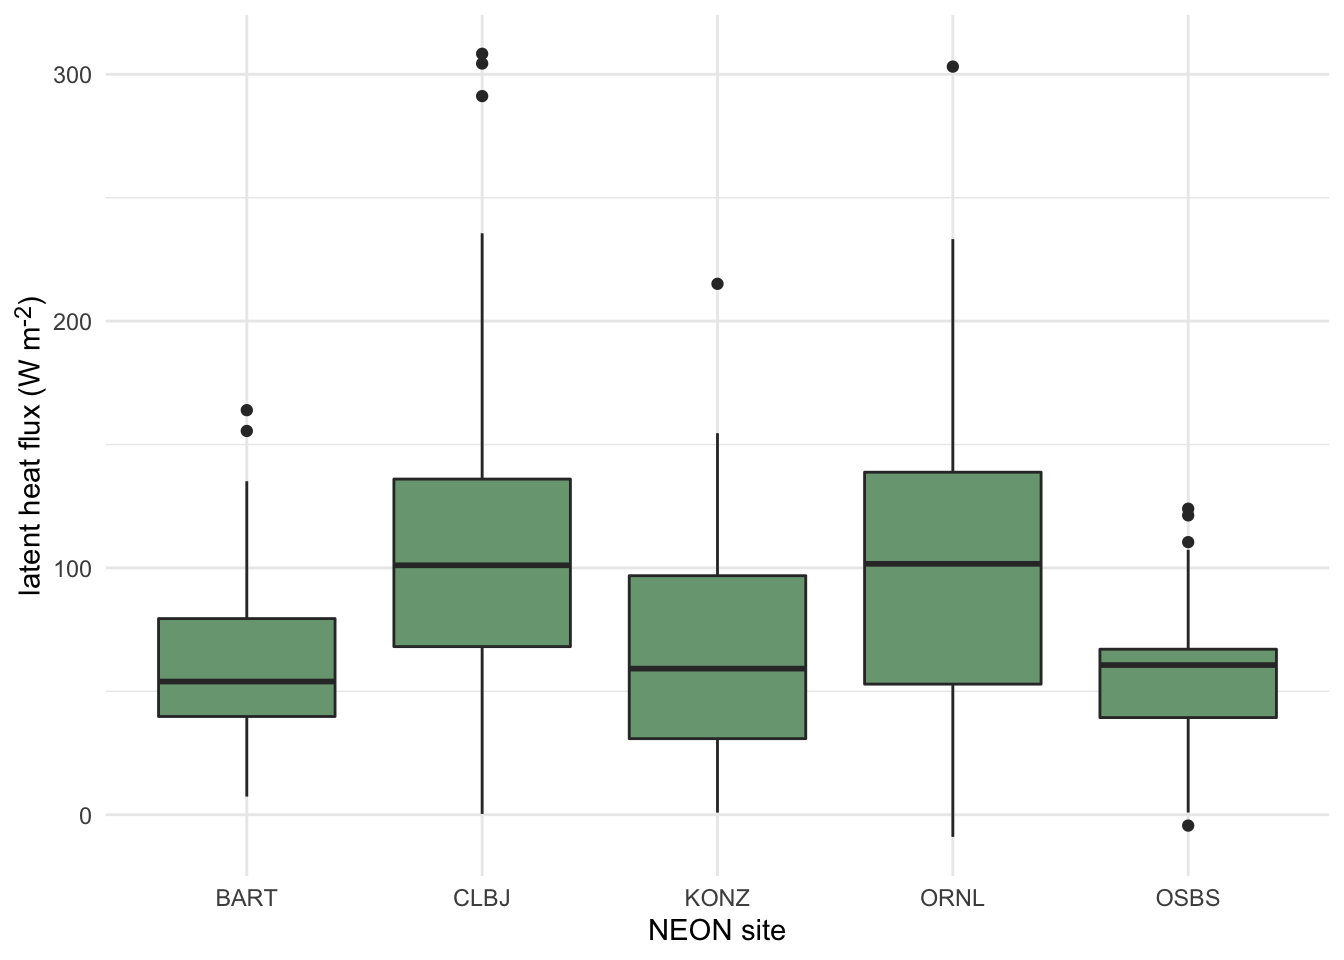 Distributions of daily latent heat flux during May at 5 NEON sites shown as boxplots.